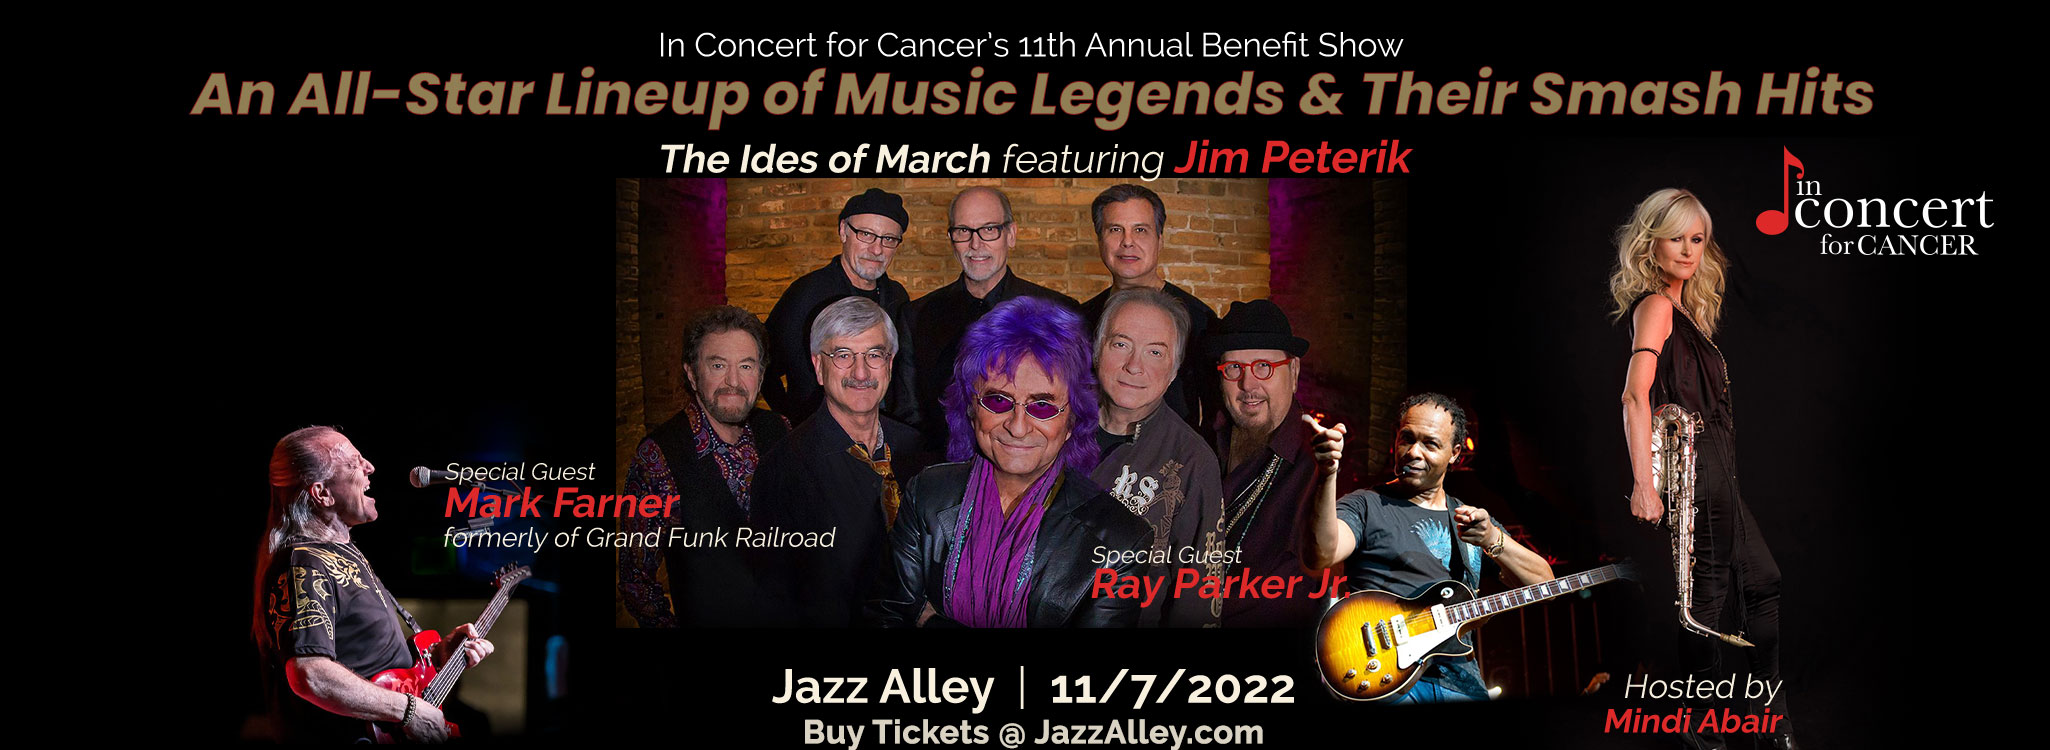 In Concert for Cancer - November 7, 2022 - An All Star Lineup of Music Legends & Their Smash Hits featuring Jim Peterik, Mark Farner, Ray Parker Jr, Mindi Abair